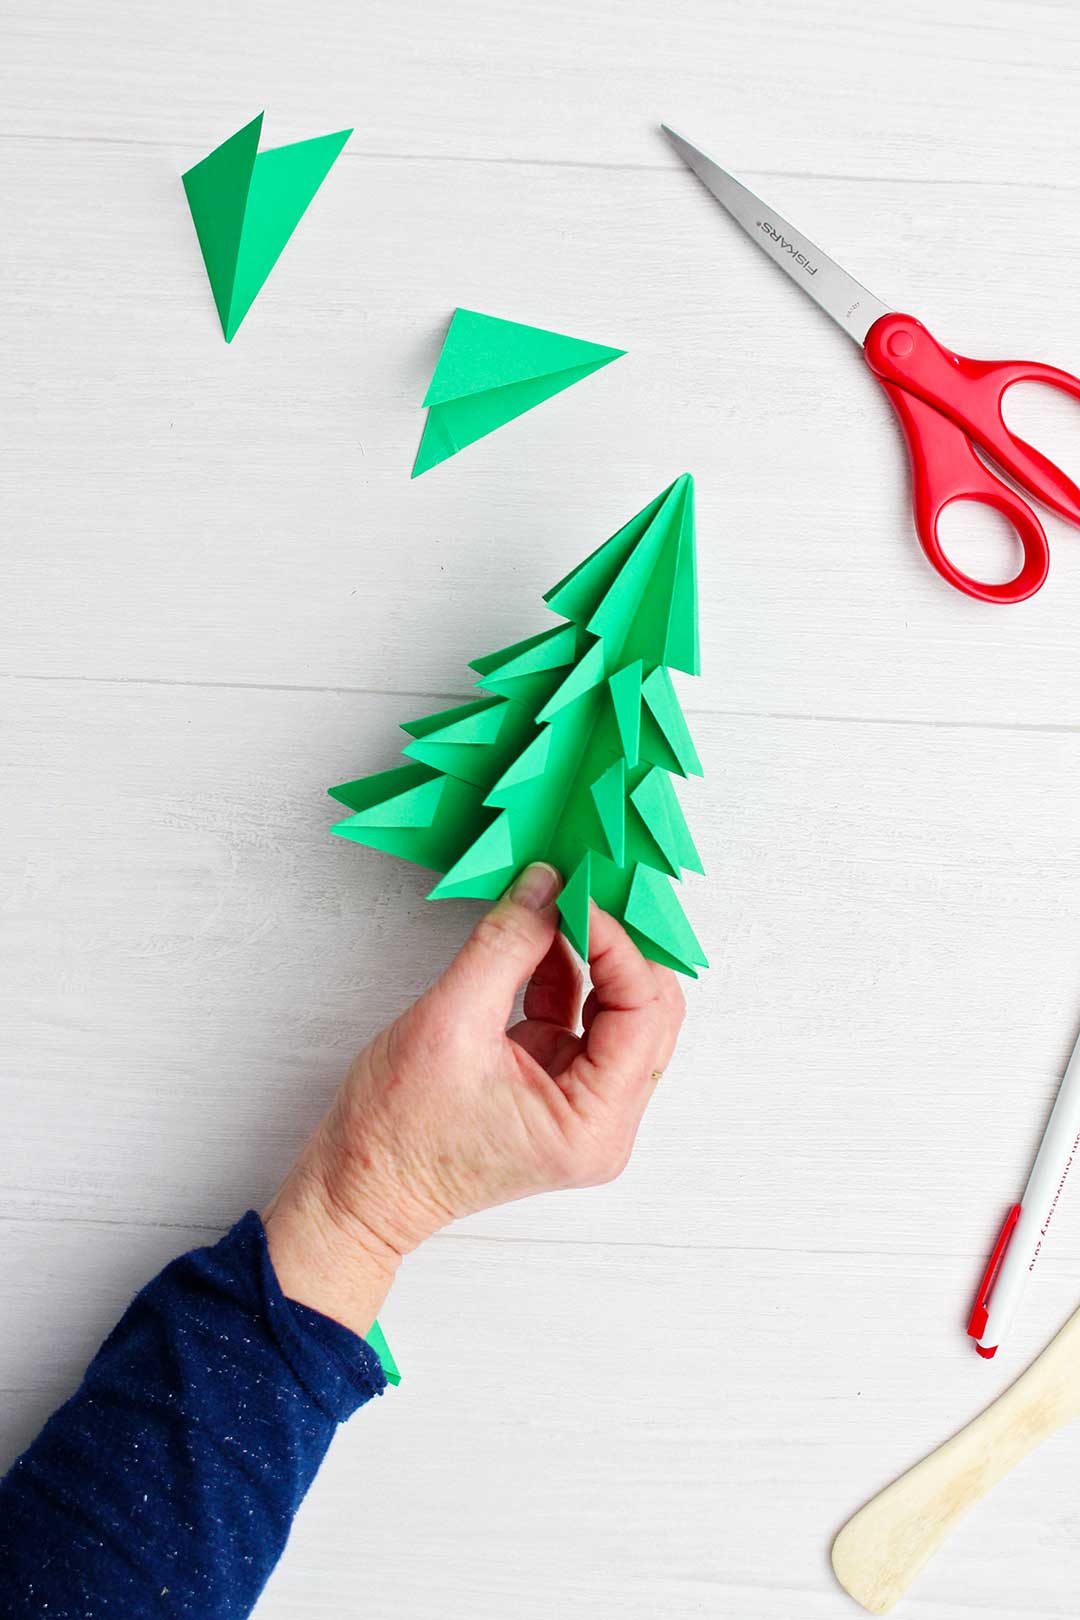 Completed green paper origami tree with scissors near by.